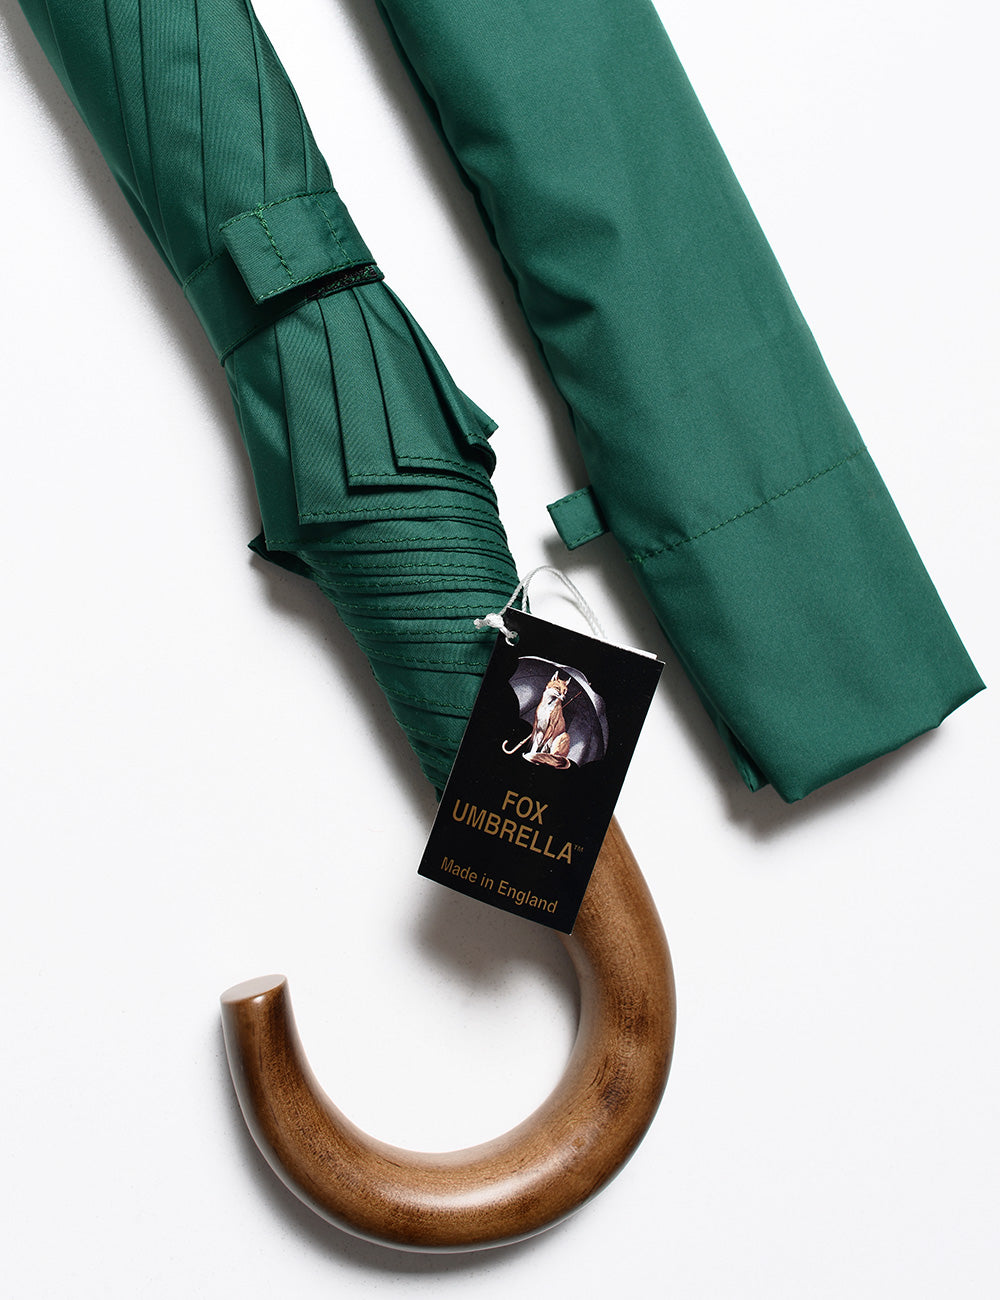 Detail of handle and sheath of TEL 1 Telecospic Umbrella in Emerald